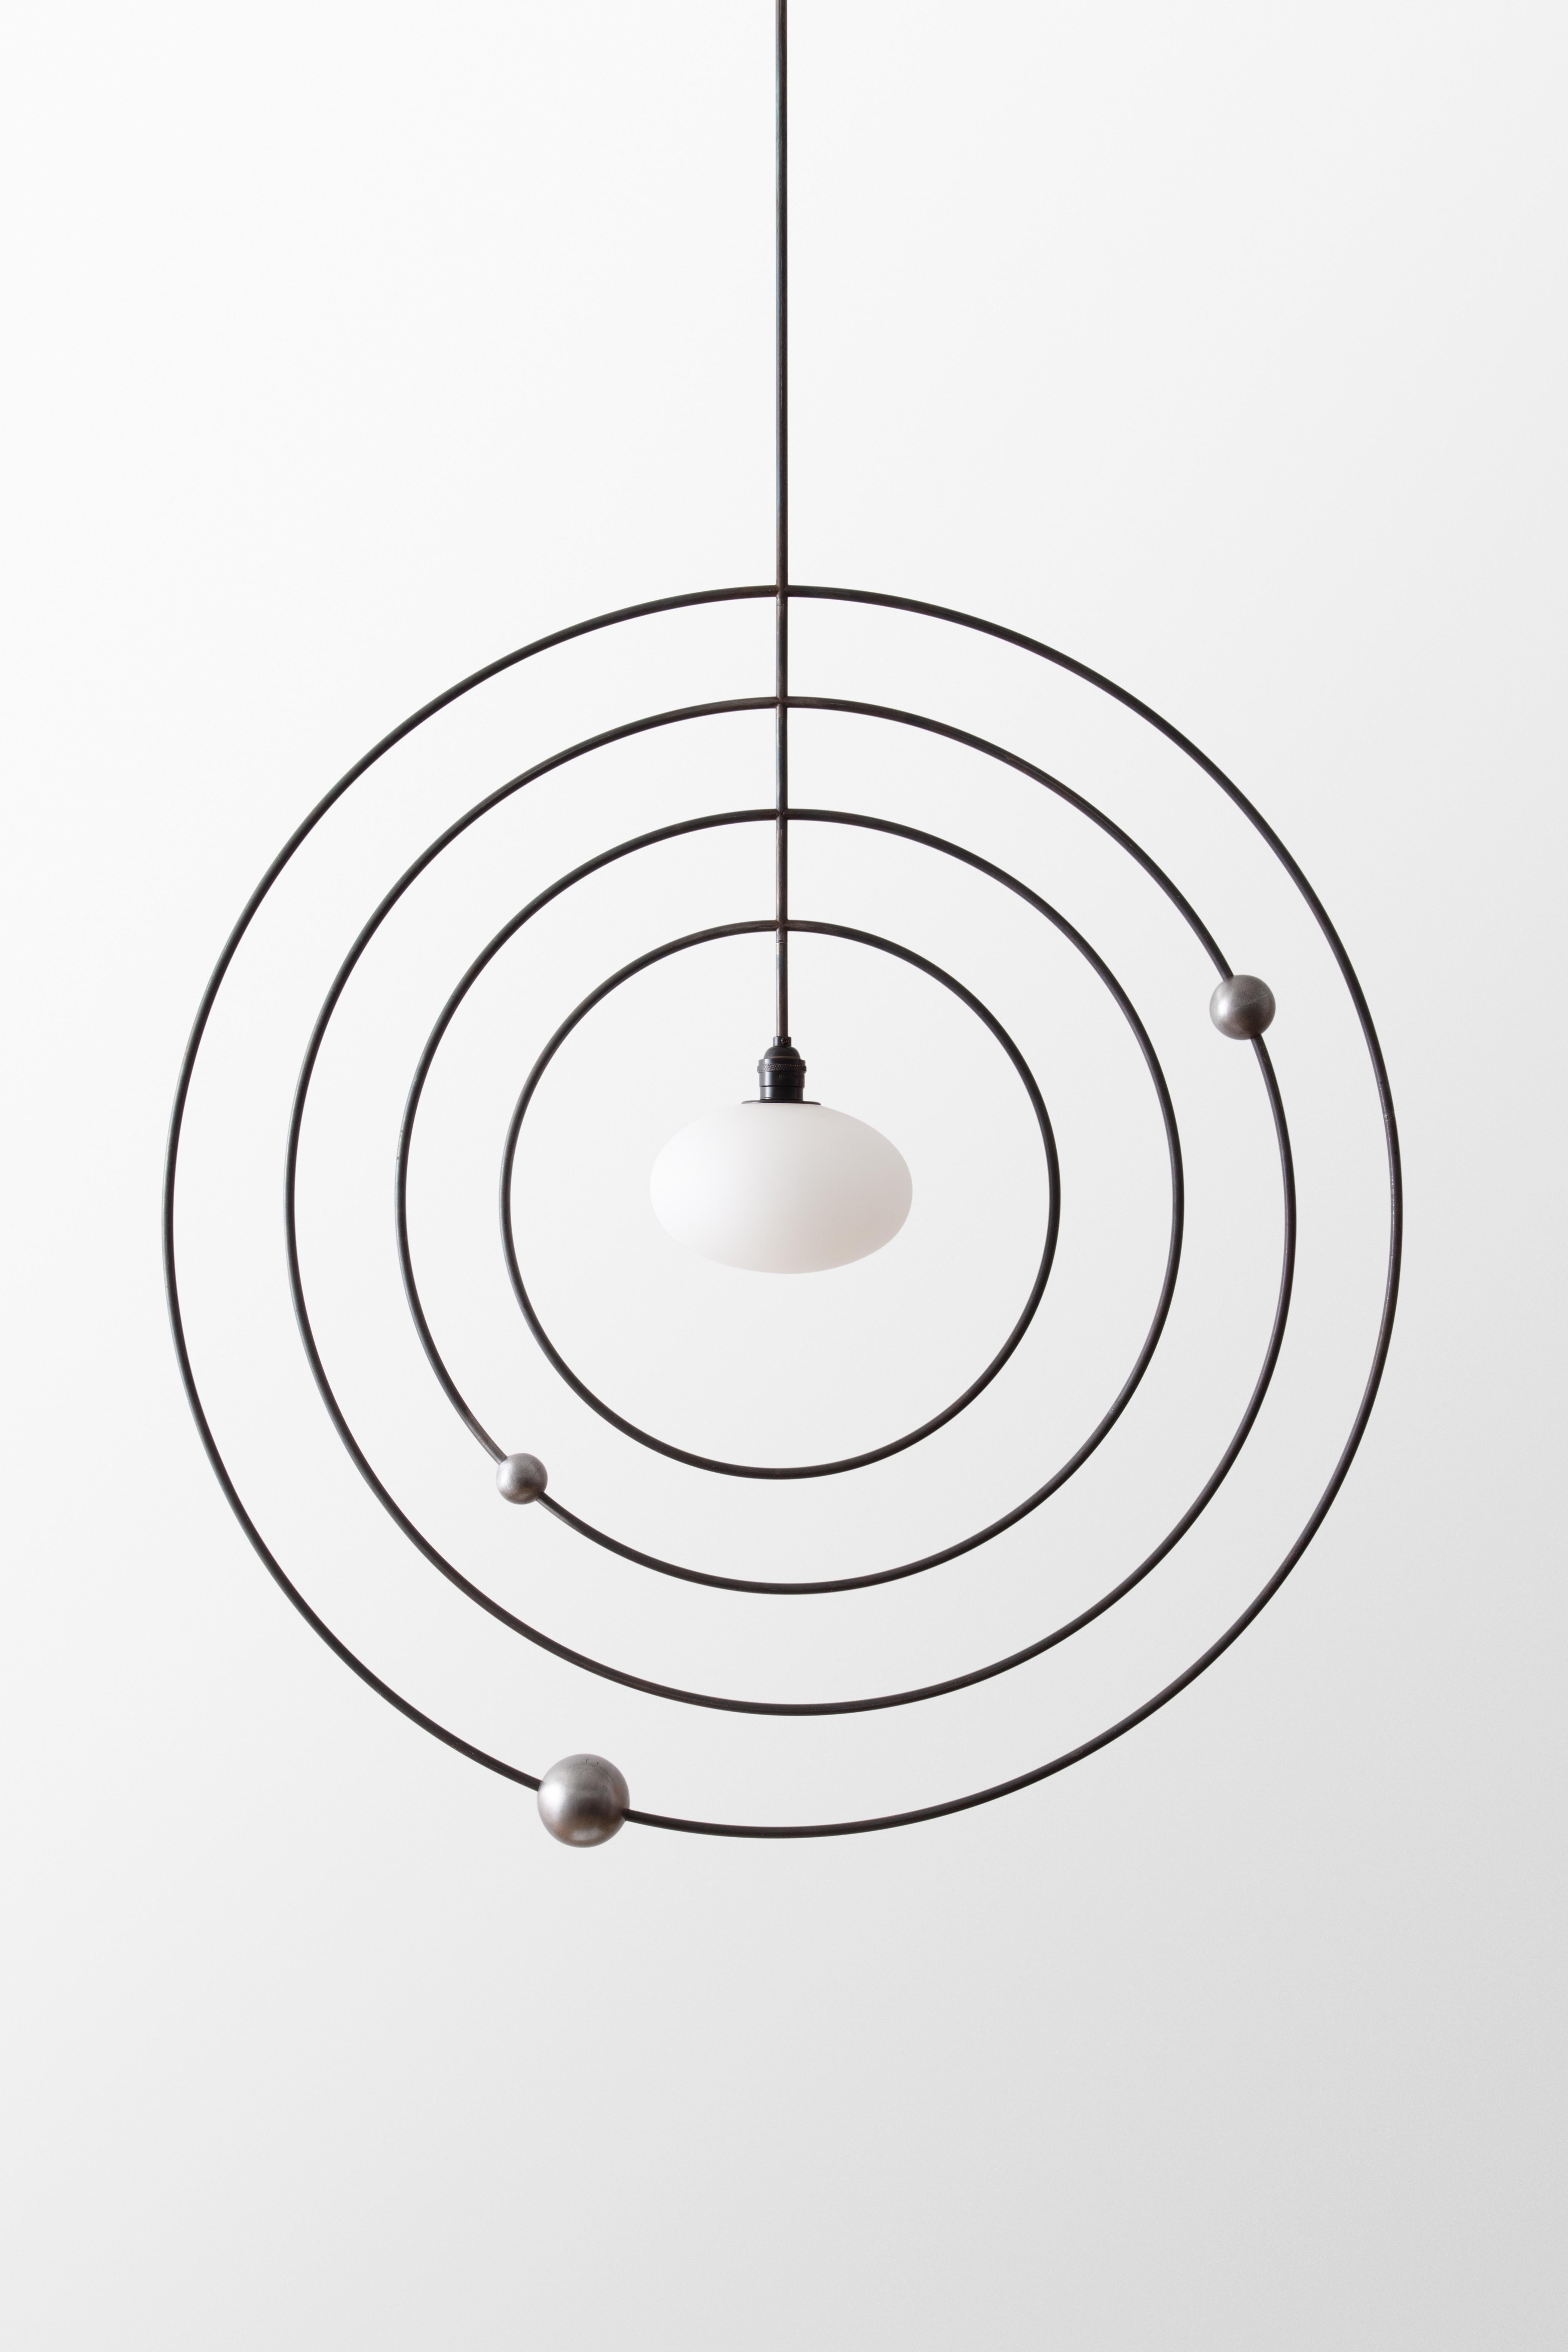 The Mobile series combine sculpture with lighting, invoking motifs from atomic models and the space age. The concentric rings can be spun and reconfigured, inviting play and whimsy. The central orb illuminates the steel rings, which are